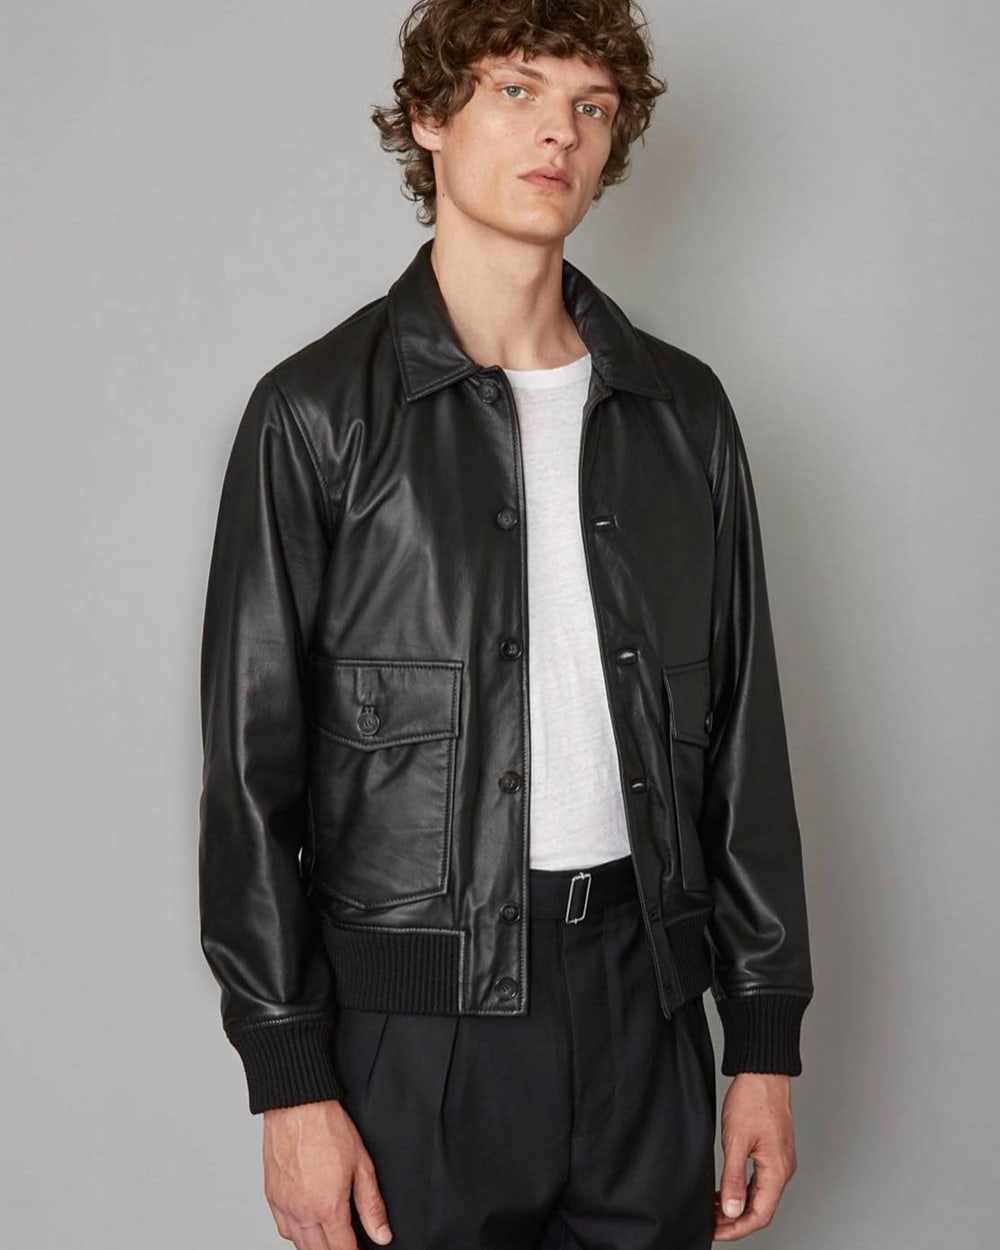 Man wearing Officine Générale black pleated pants, tucked in white T-shirt and black leather collared flight jacket